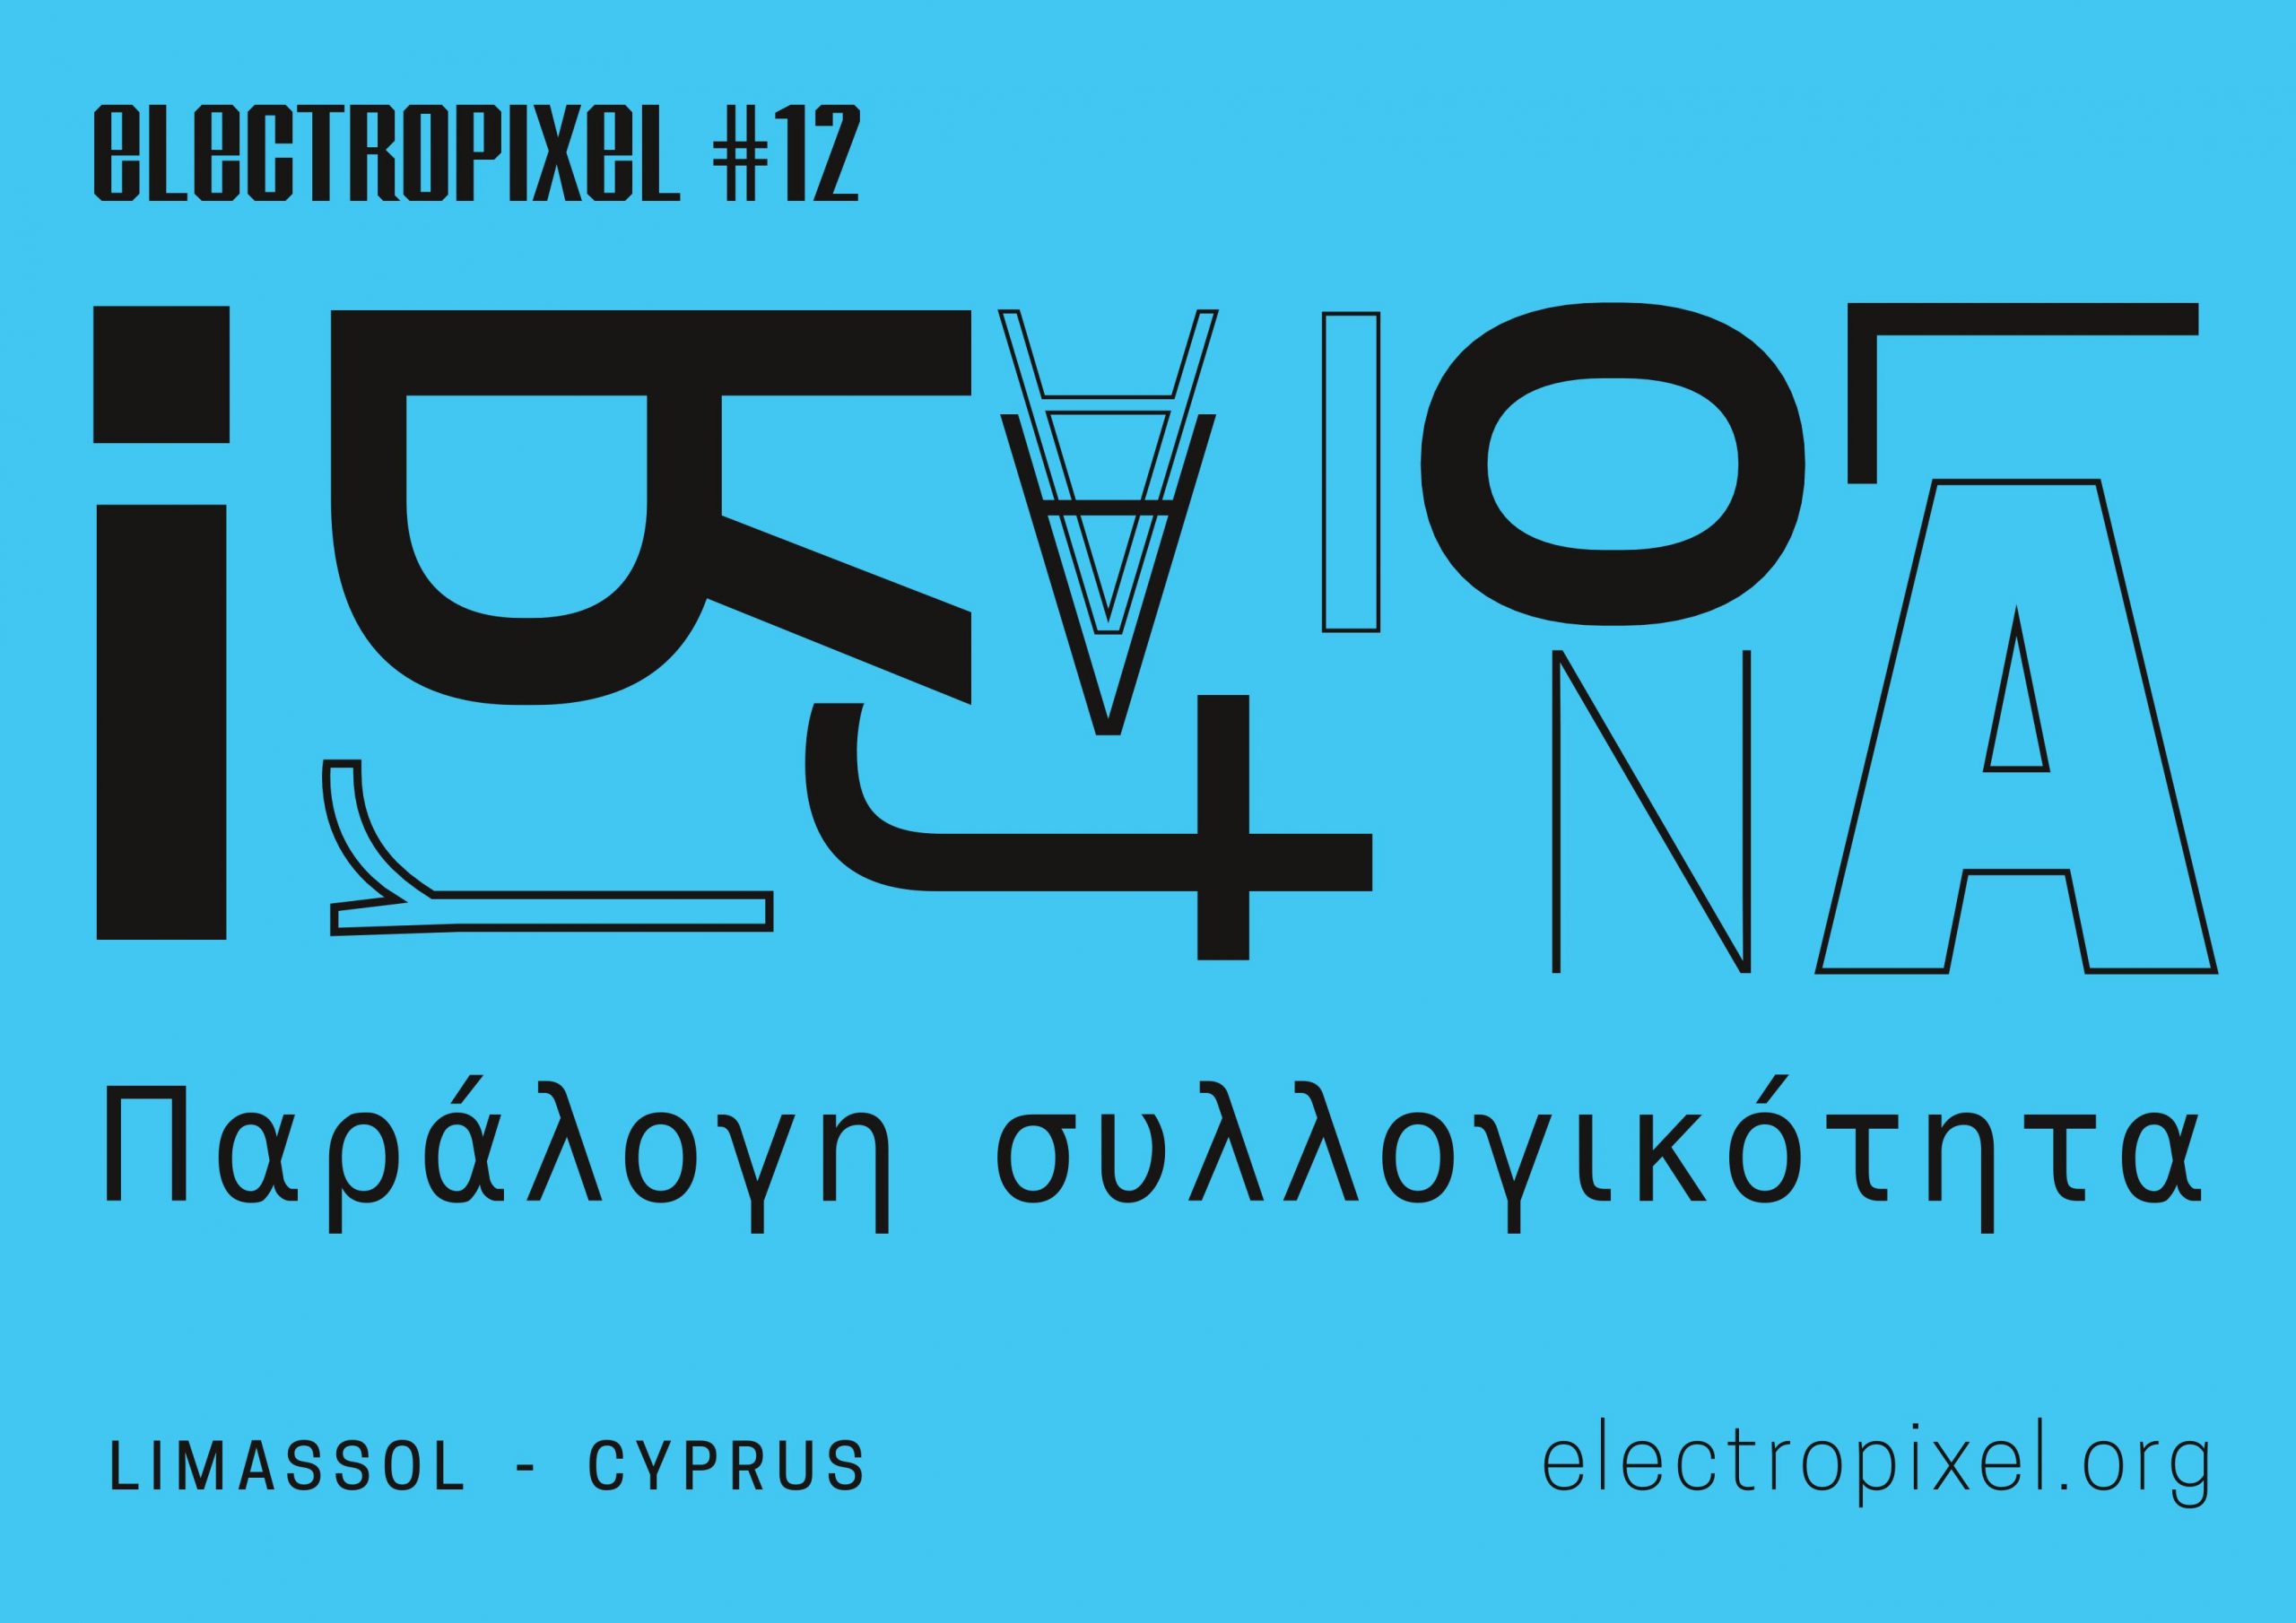 ELECTROPIXEL 12 – LIMASSOL – 15TH AND 16TH OF JULY